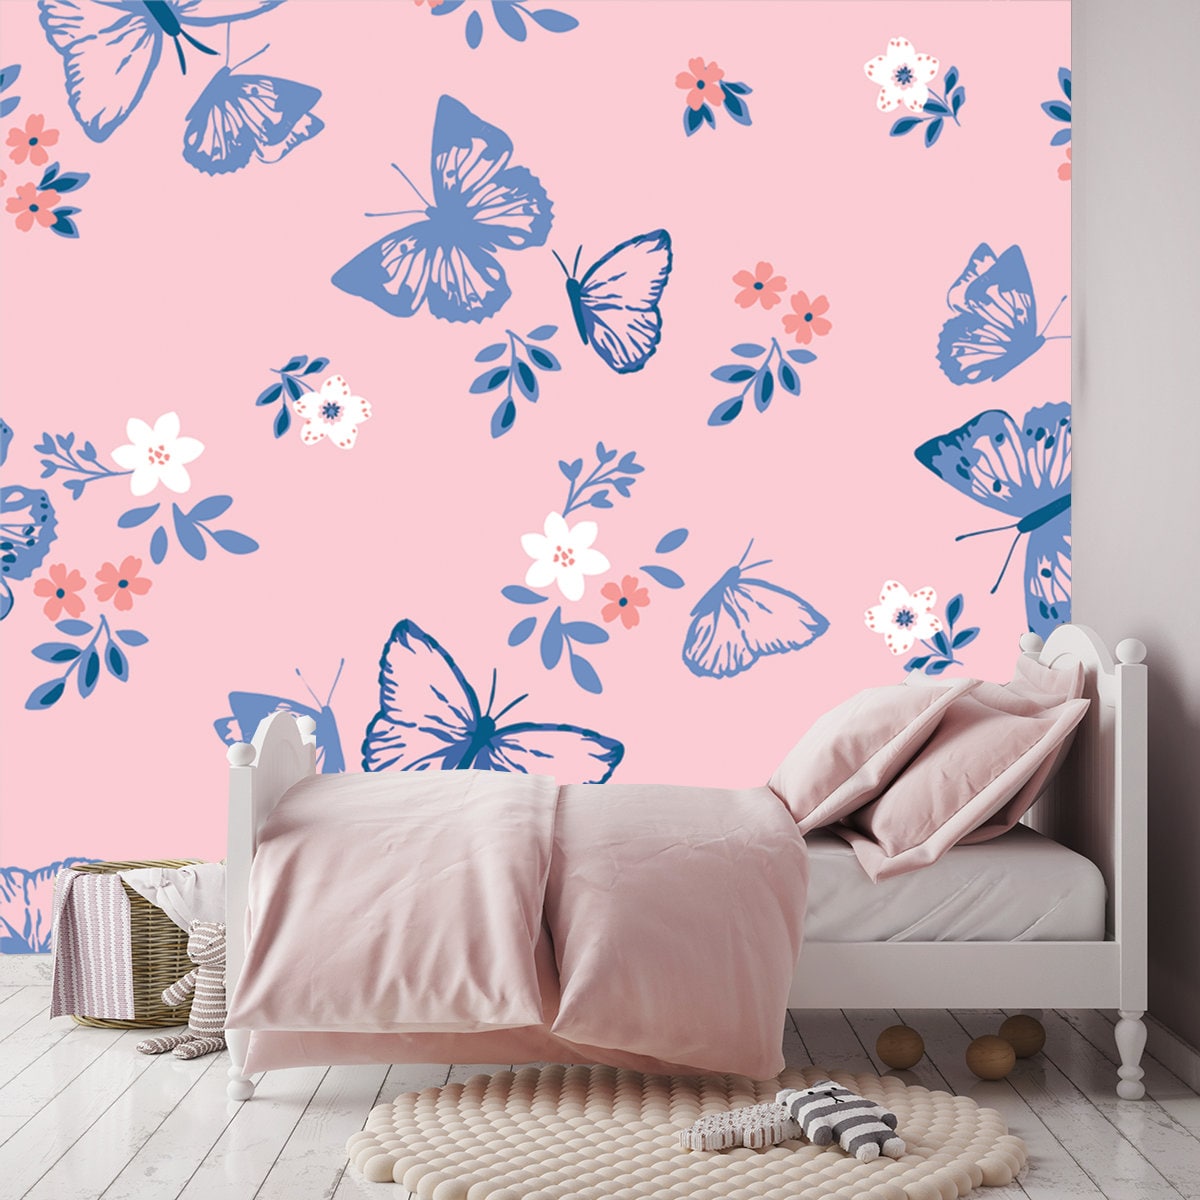 Blue Butterflies with Flowers on Pink Background Wallpaper Girl Bedroom Mural